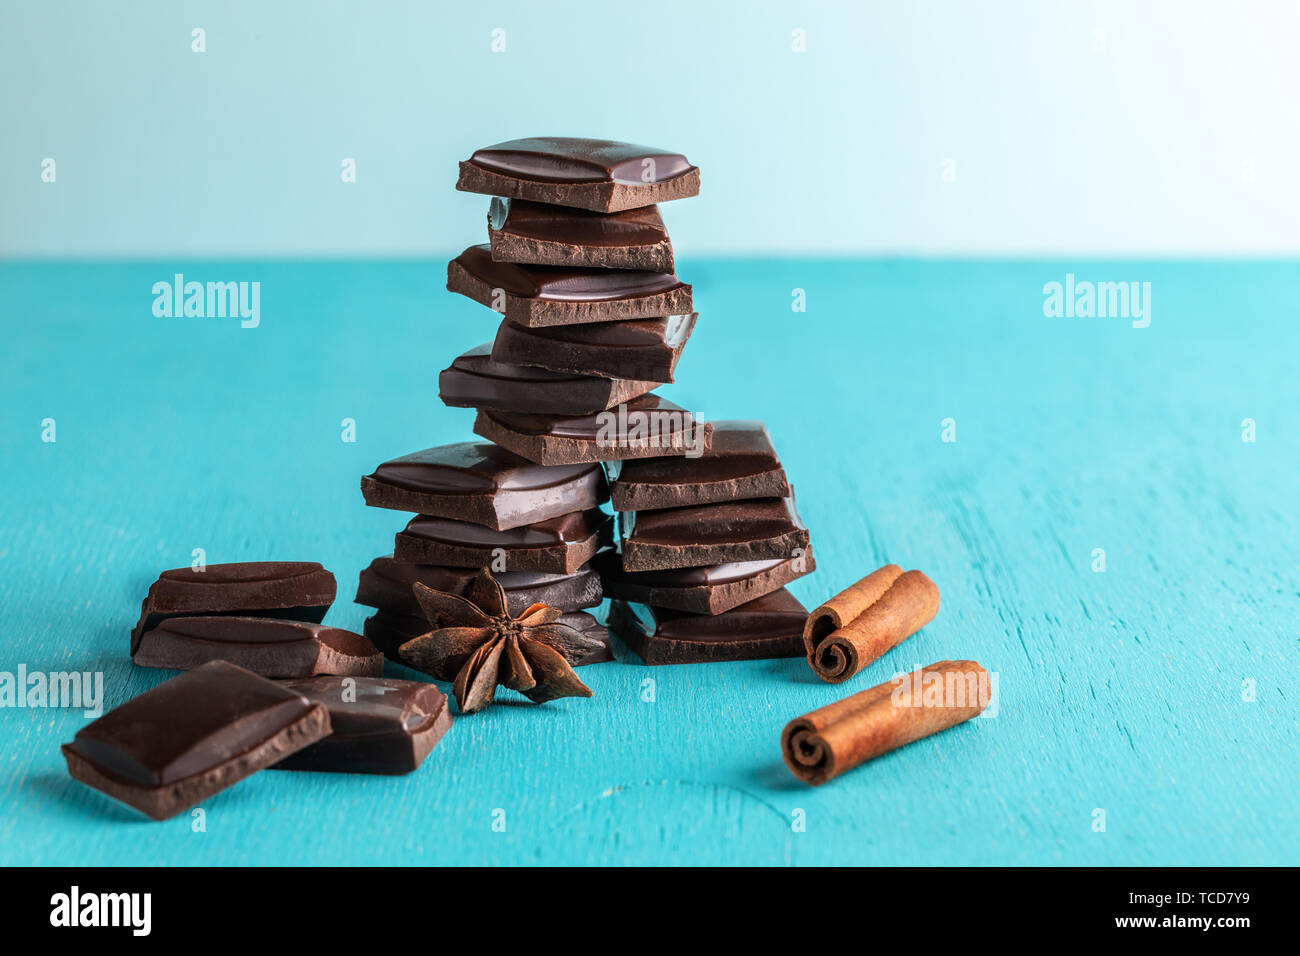 Vertical stacked slices of chocolate, cinnamon stick and star anise on  turquoise background. Stock Photo